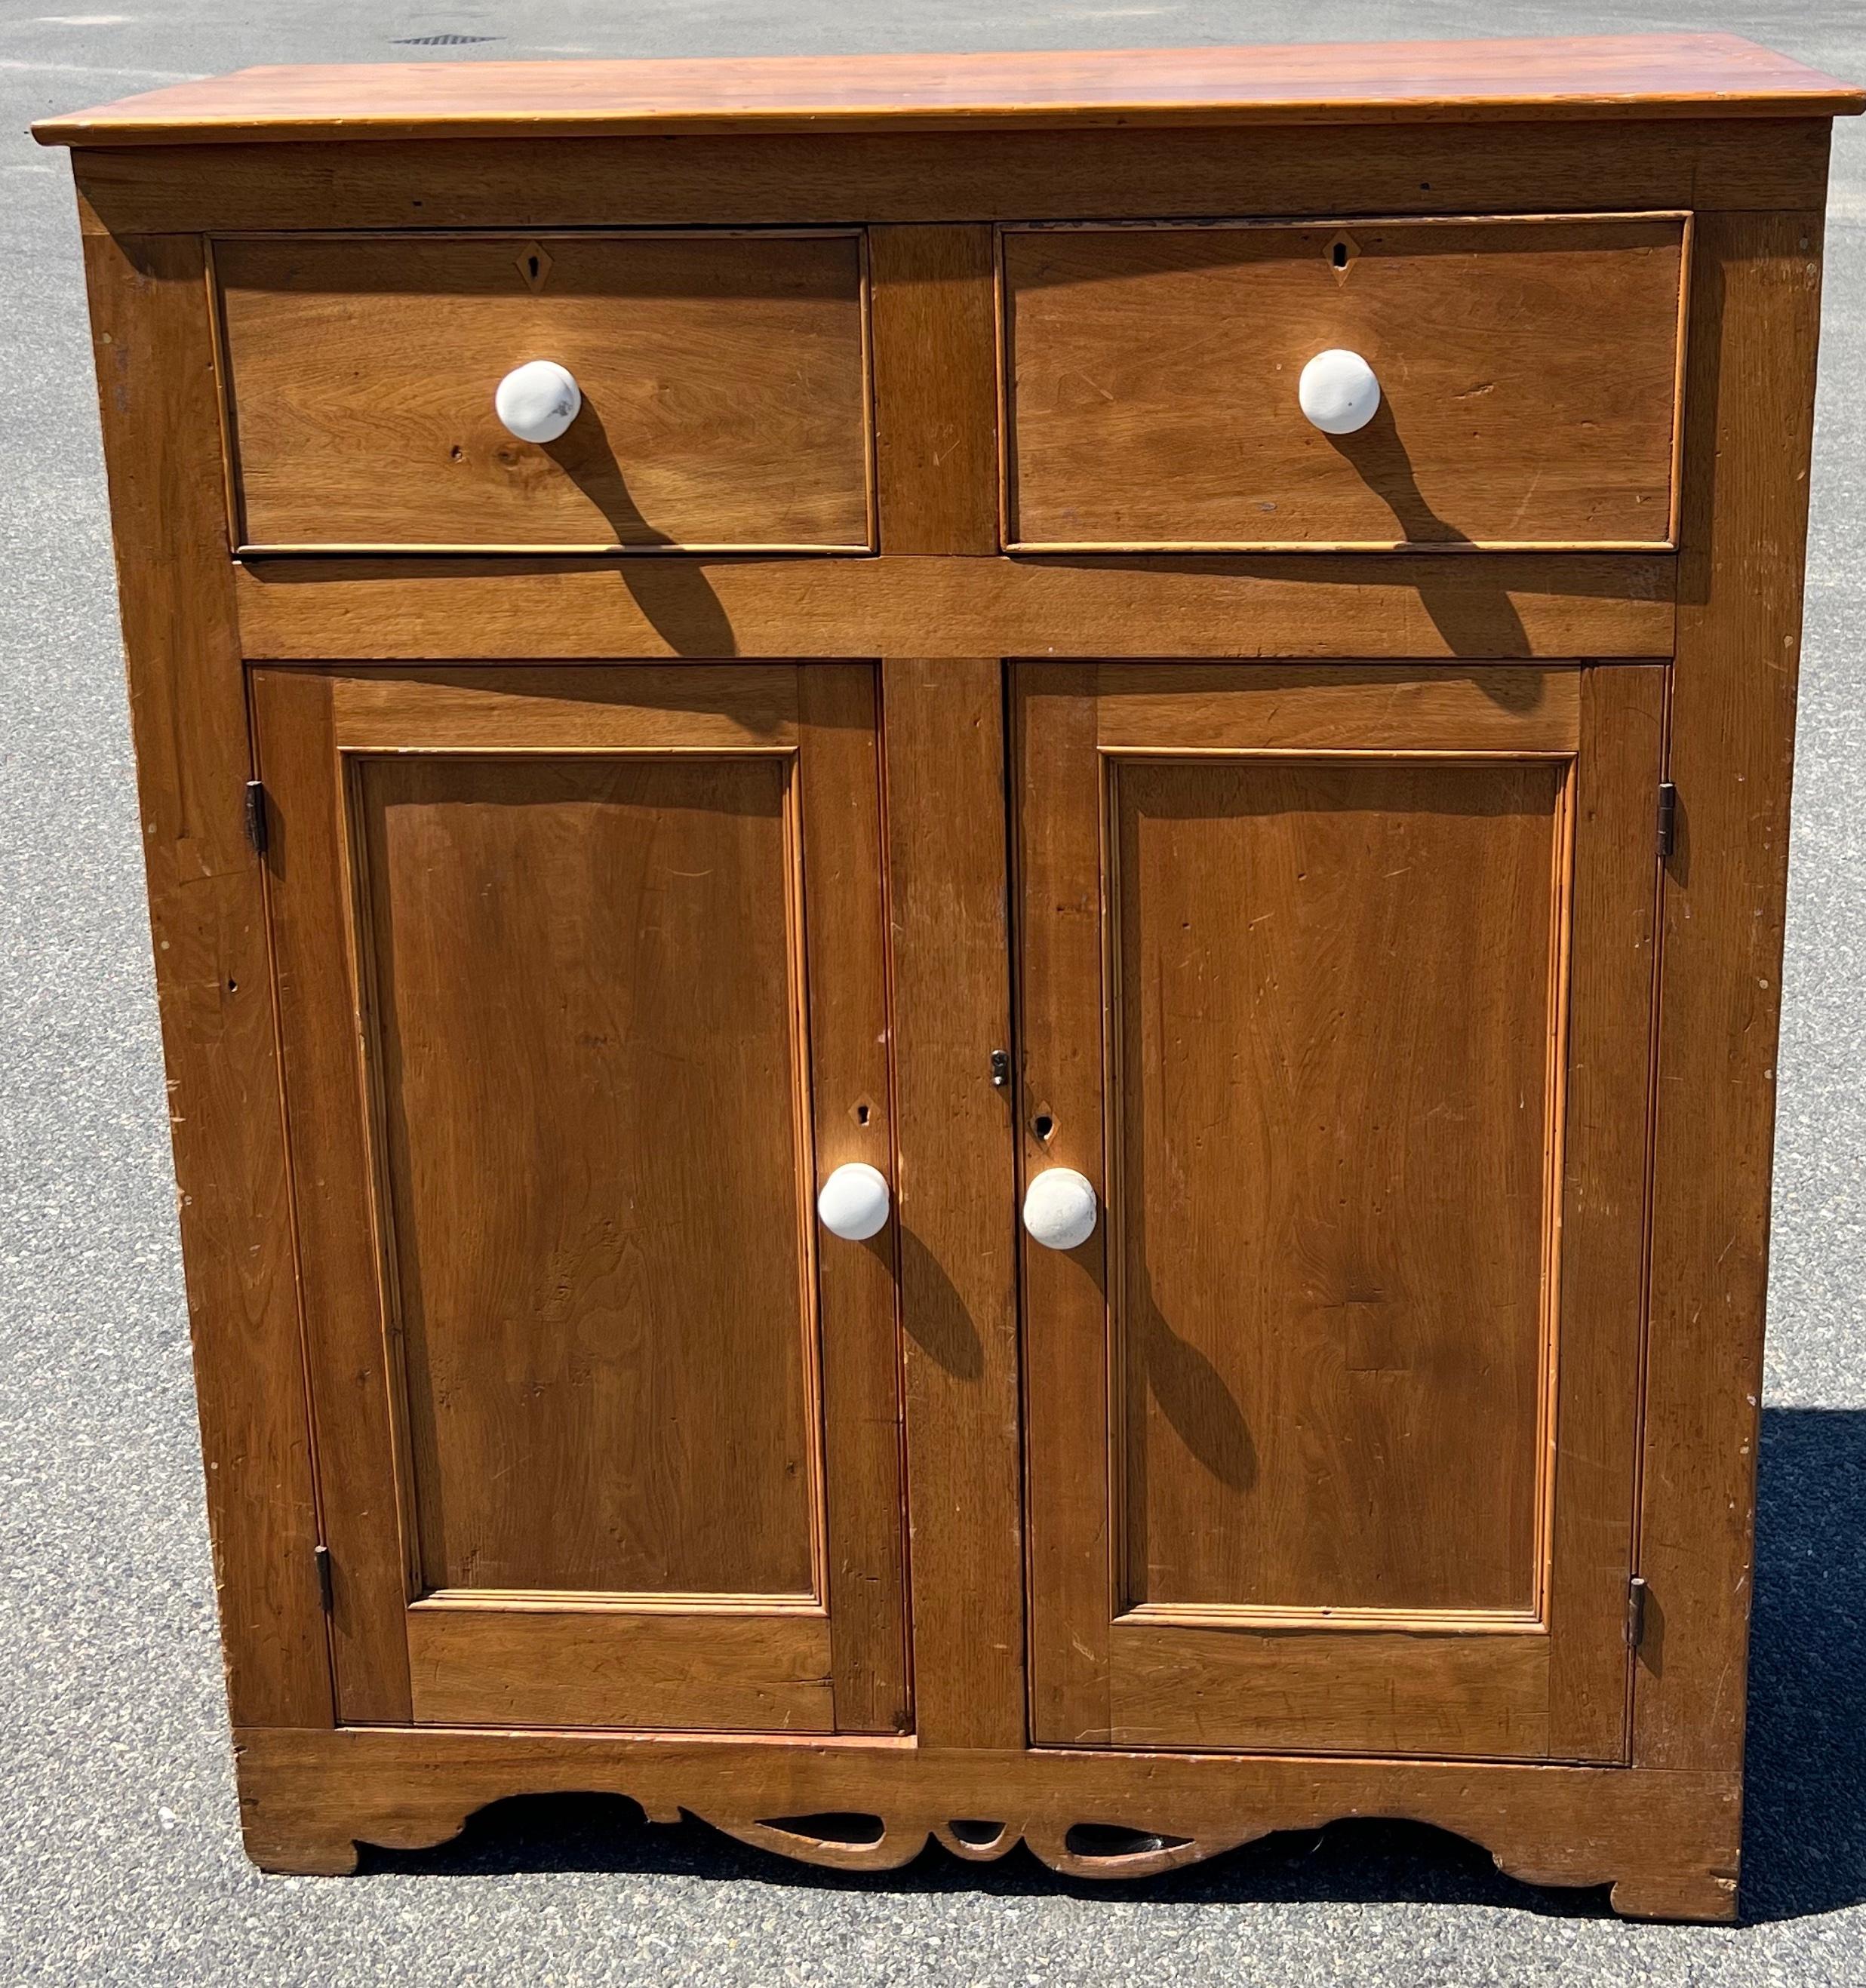 19th Century Tall Butternut Cupboard with white porcelain knobs.  Two beaded drawers over two paneled doors, diamond inlaid keyhole details (no keys), delicately shaped toe kick with cut-outs.